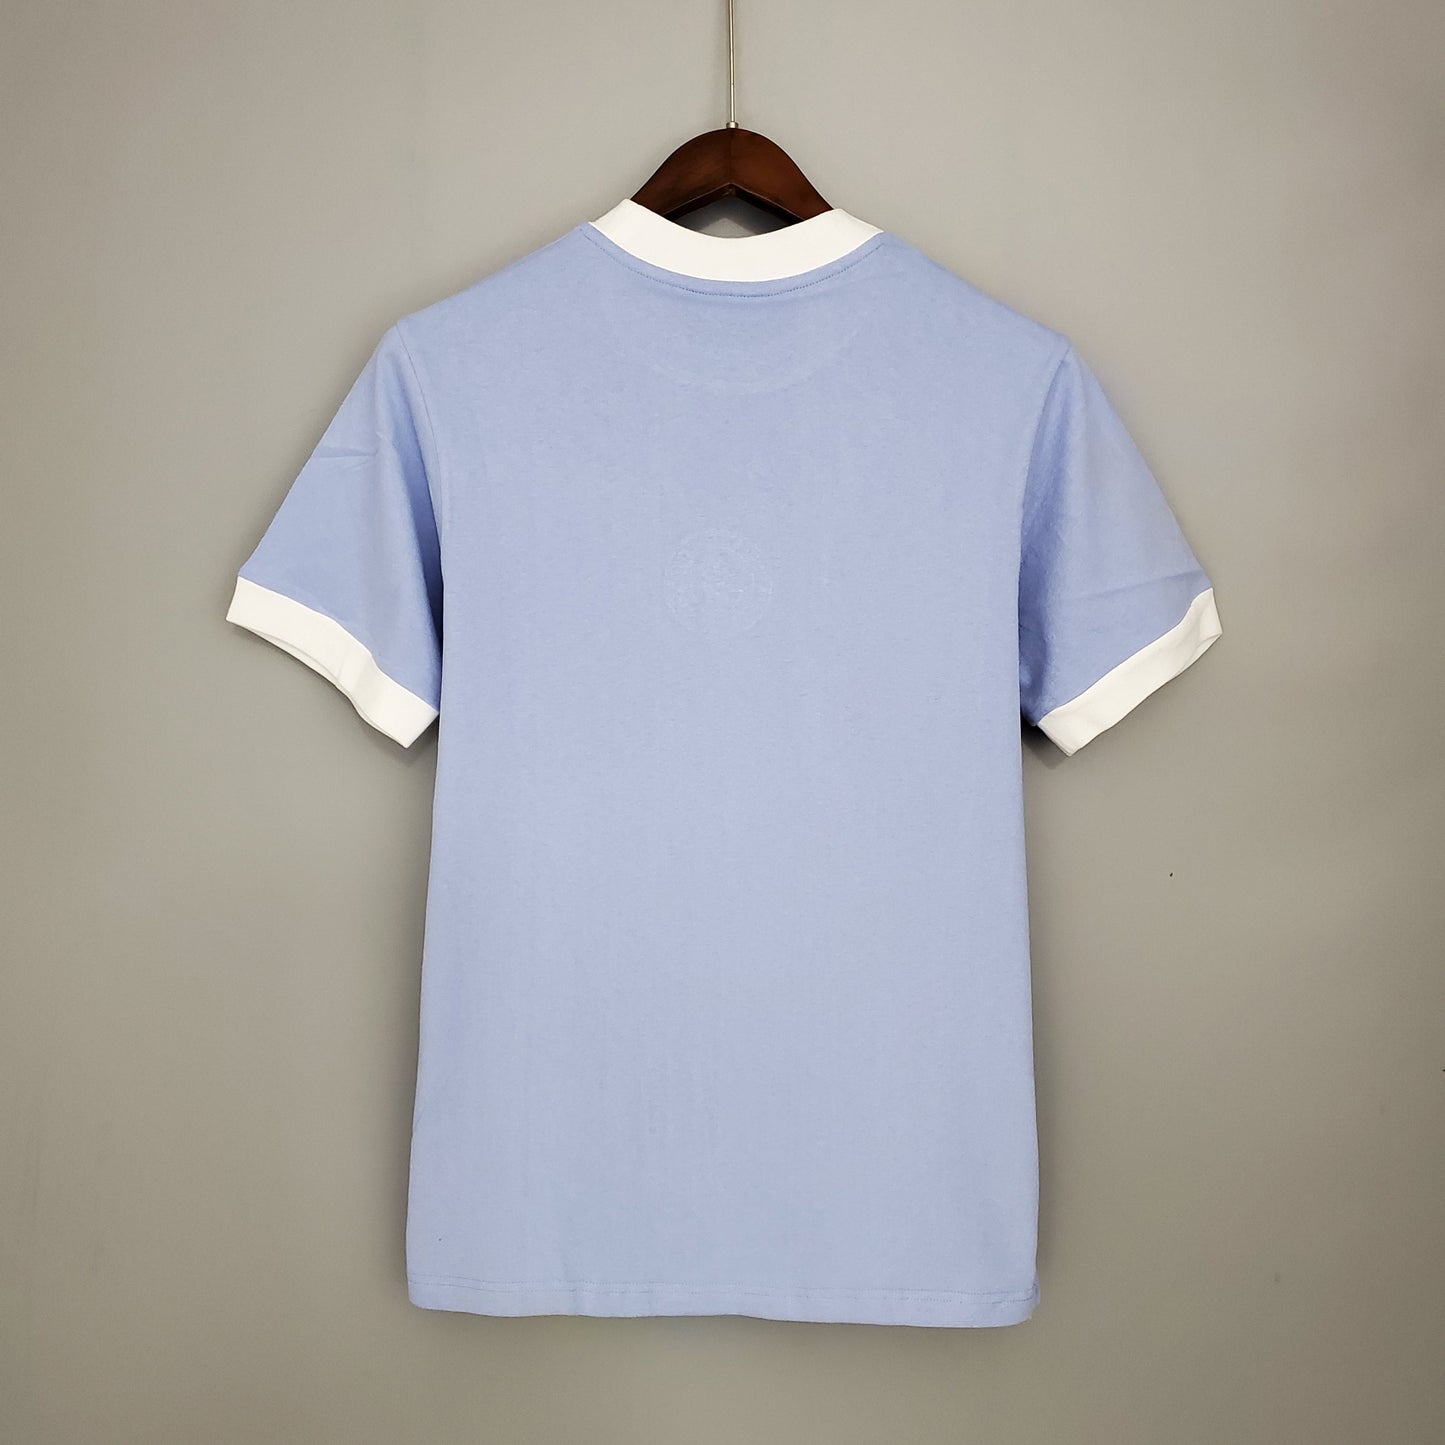 MANCHESTER CITY 1972 - 1973 HOME JERSEY